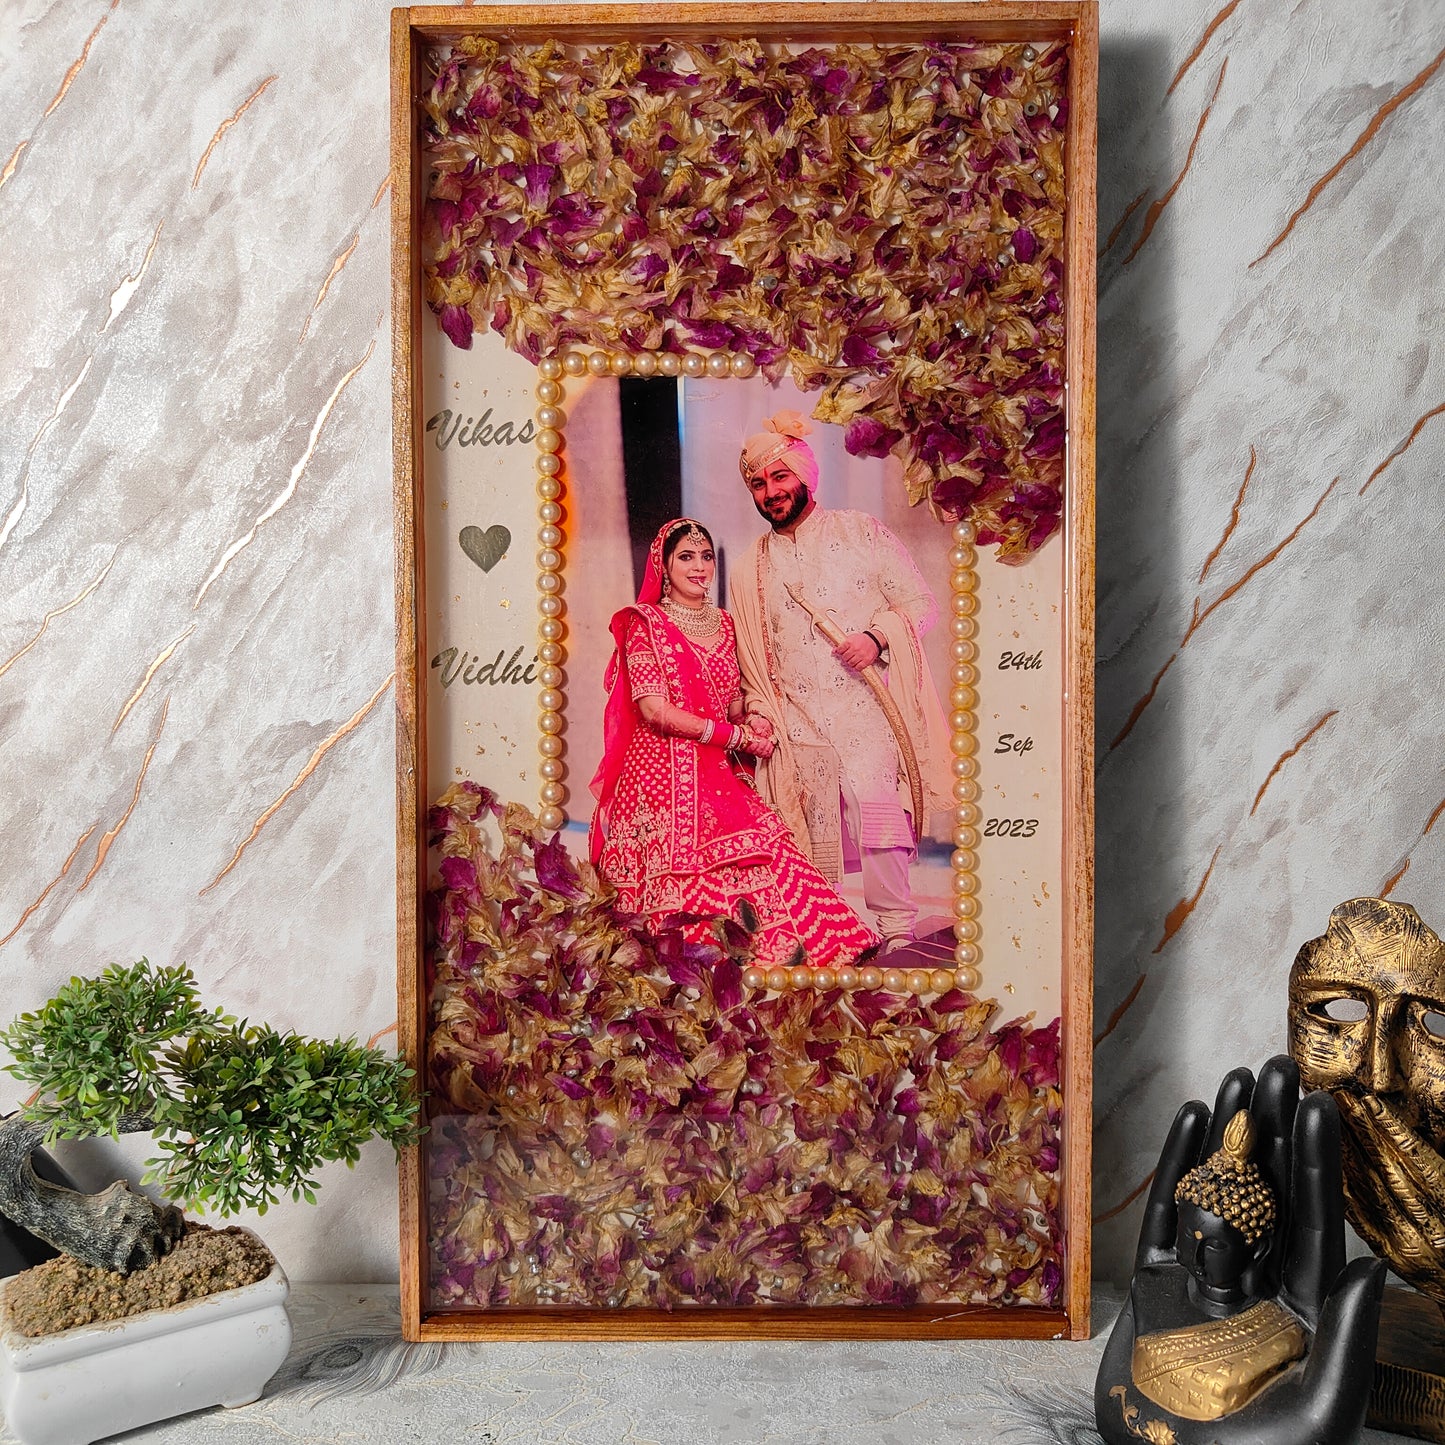 Wooden frame rectangular Varmala preservation resin with couple photo and wedding date 12 by 24 inch size